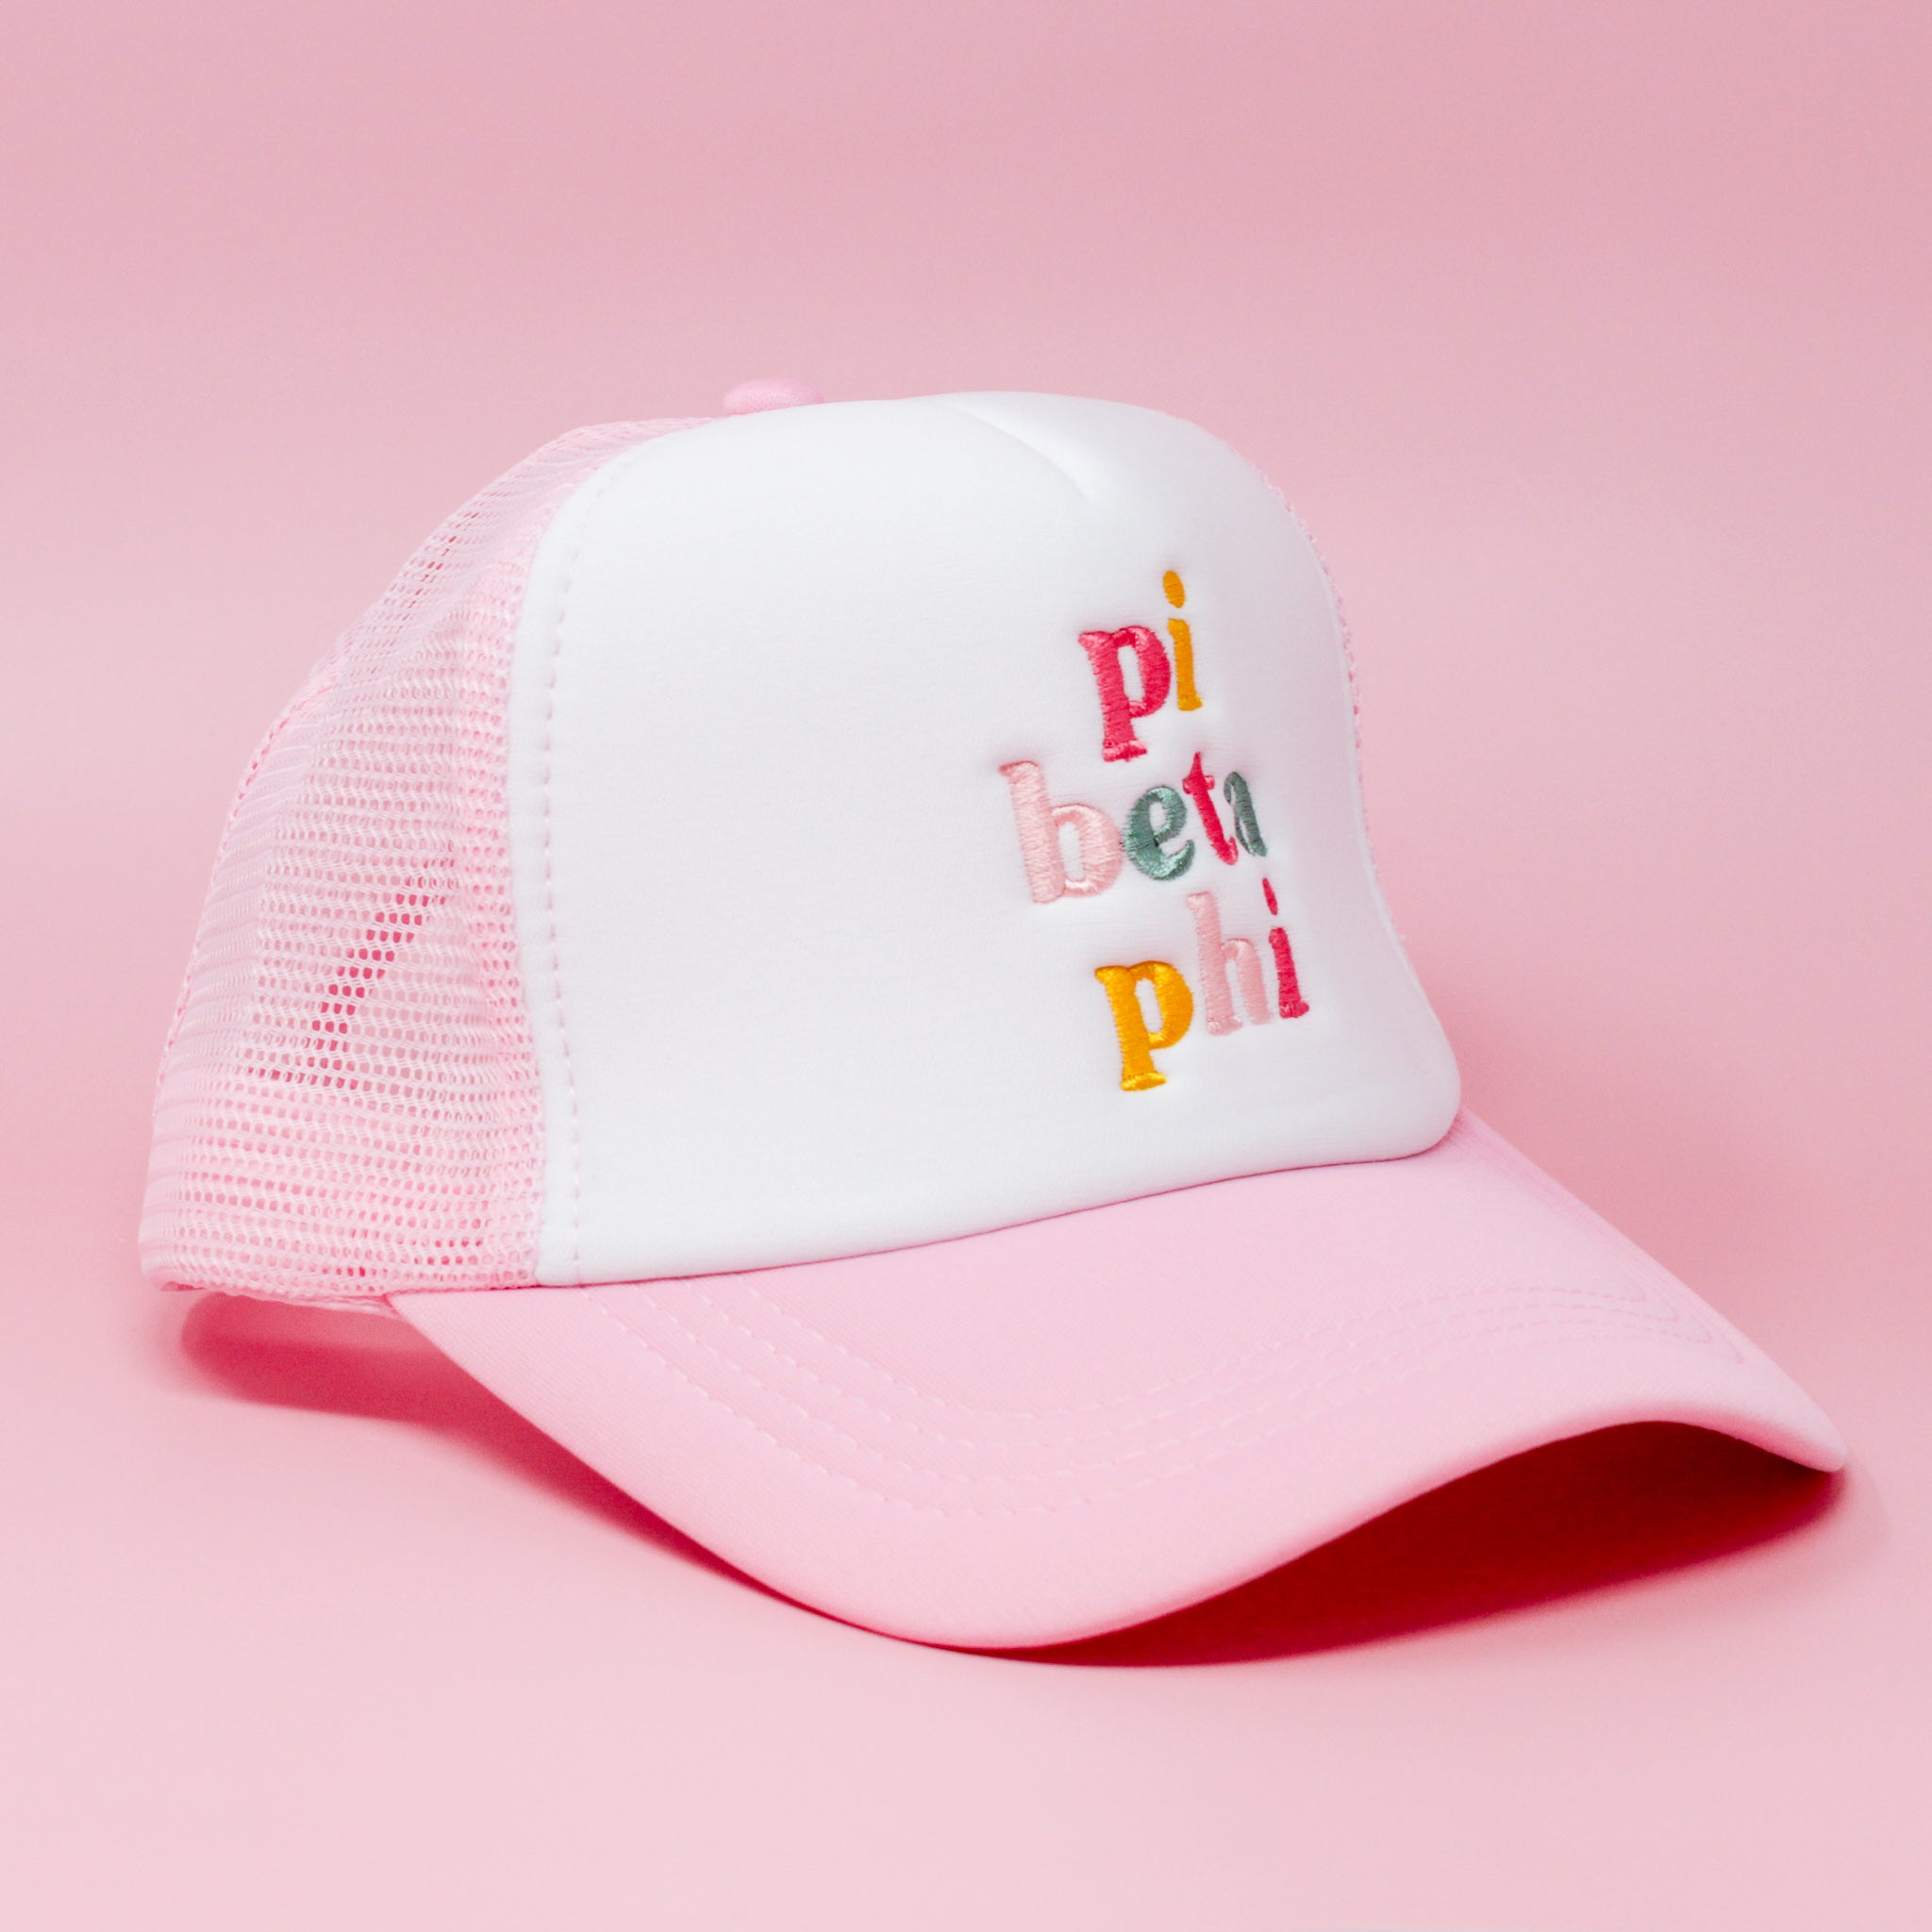 Sorority Embroidered Trucker Hat - 19 Chapters Available!